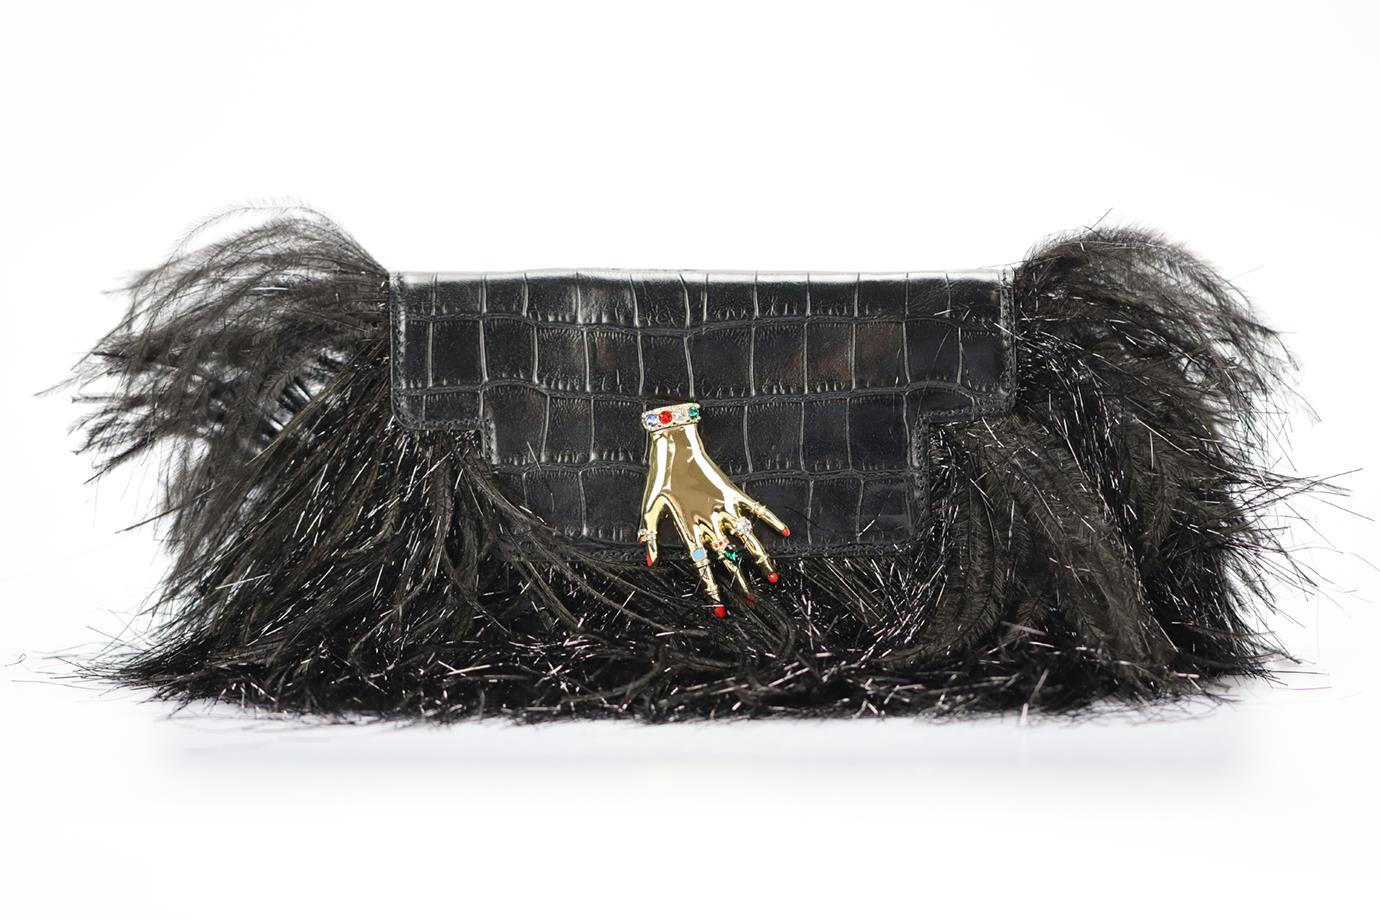 Sonia Rykiel Feather Trimmed Croc Effect Leather Clutch. Black. Magnetic fastening - Front. Comes with - detachable strap. Does not come with - dustbag or box. Height: 5.2 in. Width: 8.4 in. Depth: 1.2 in. Strap drop: 21 in. Condition: Used. Very